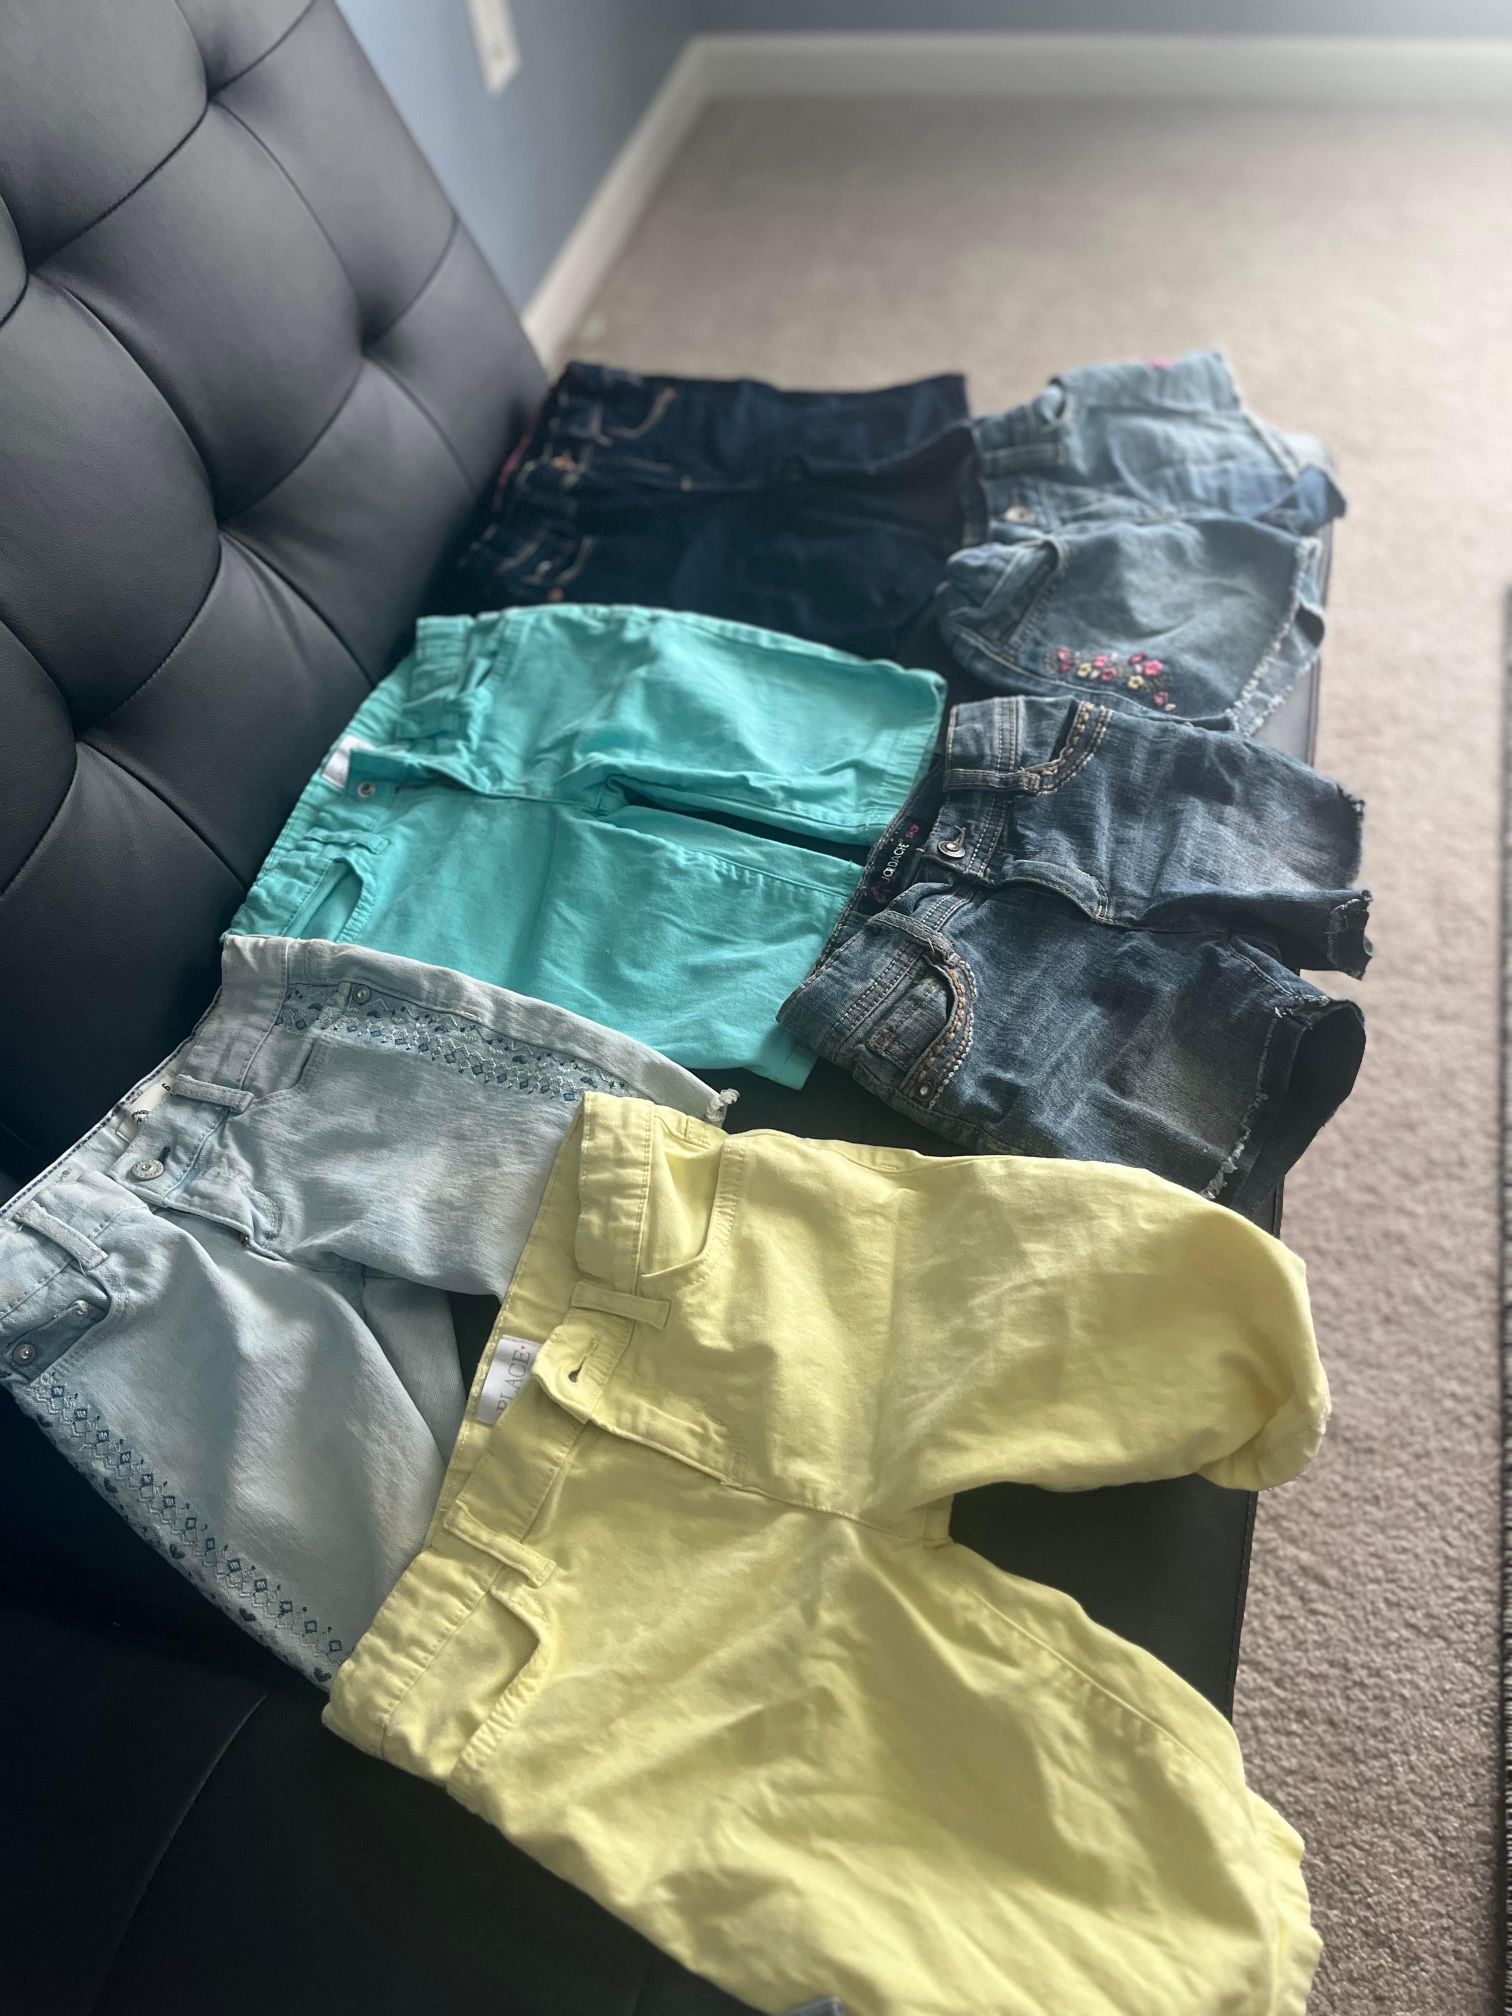 6 Sort Size 6 Each Price 3 $